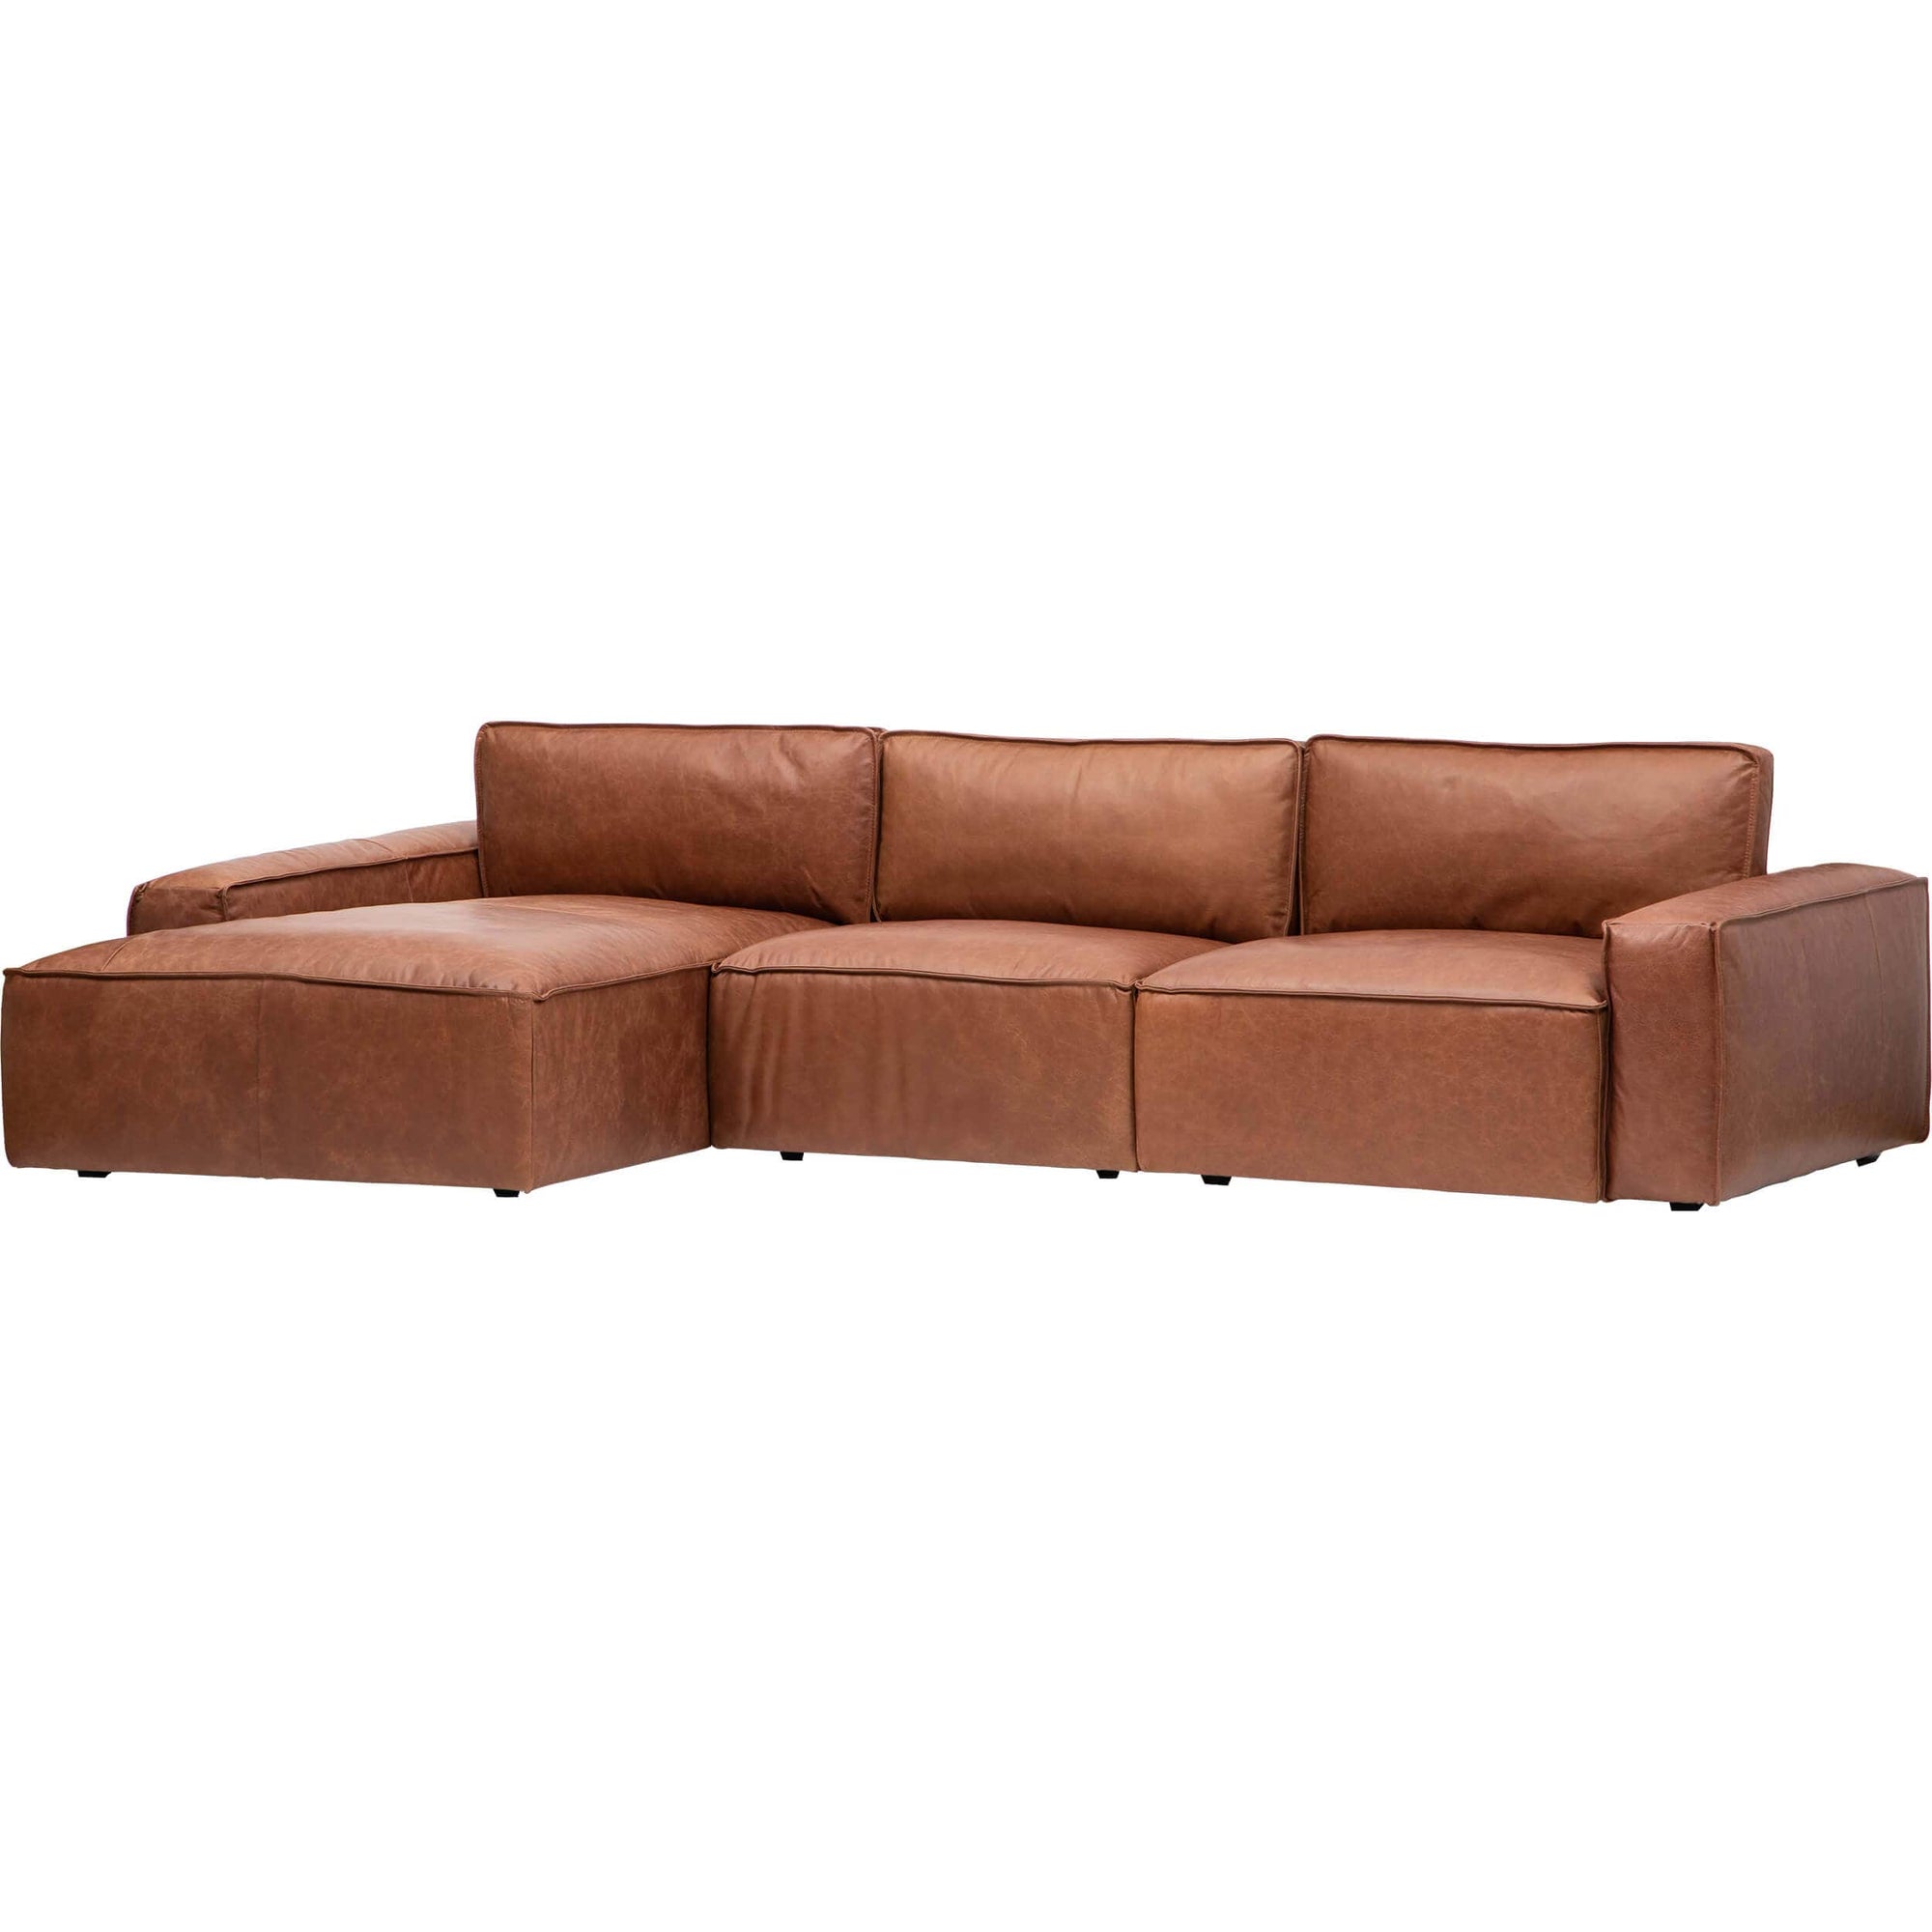 Zion Leather Sectional, Marseille – Fashion Carmel Home High